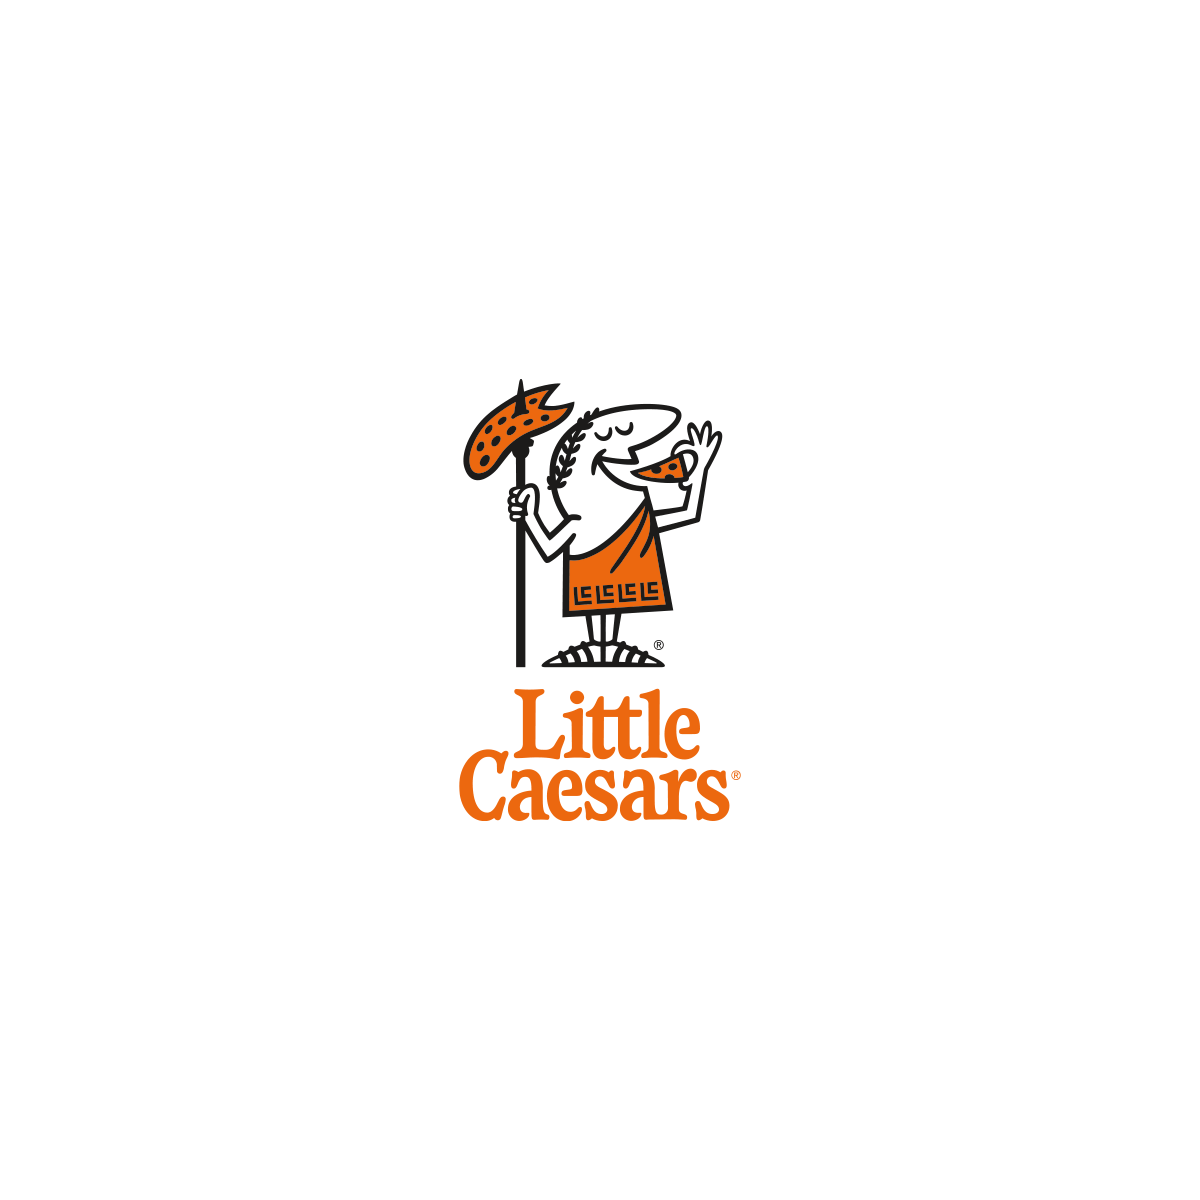 Little Caesars and Inkling